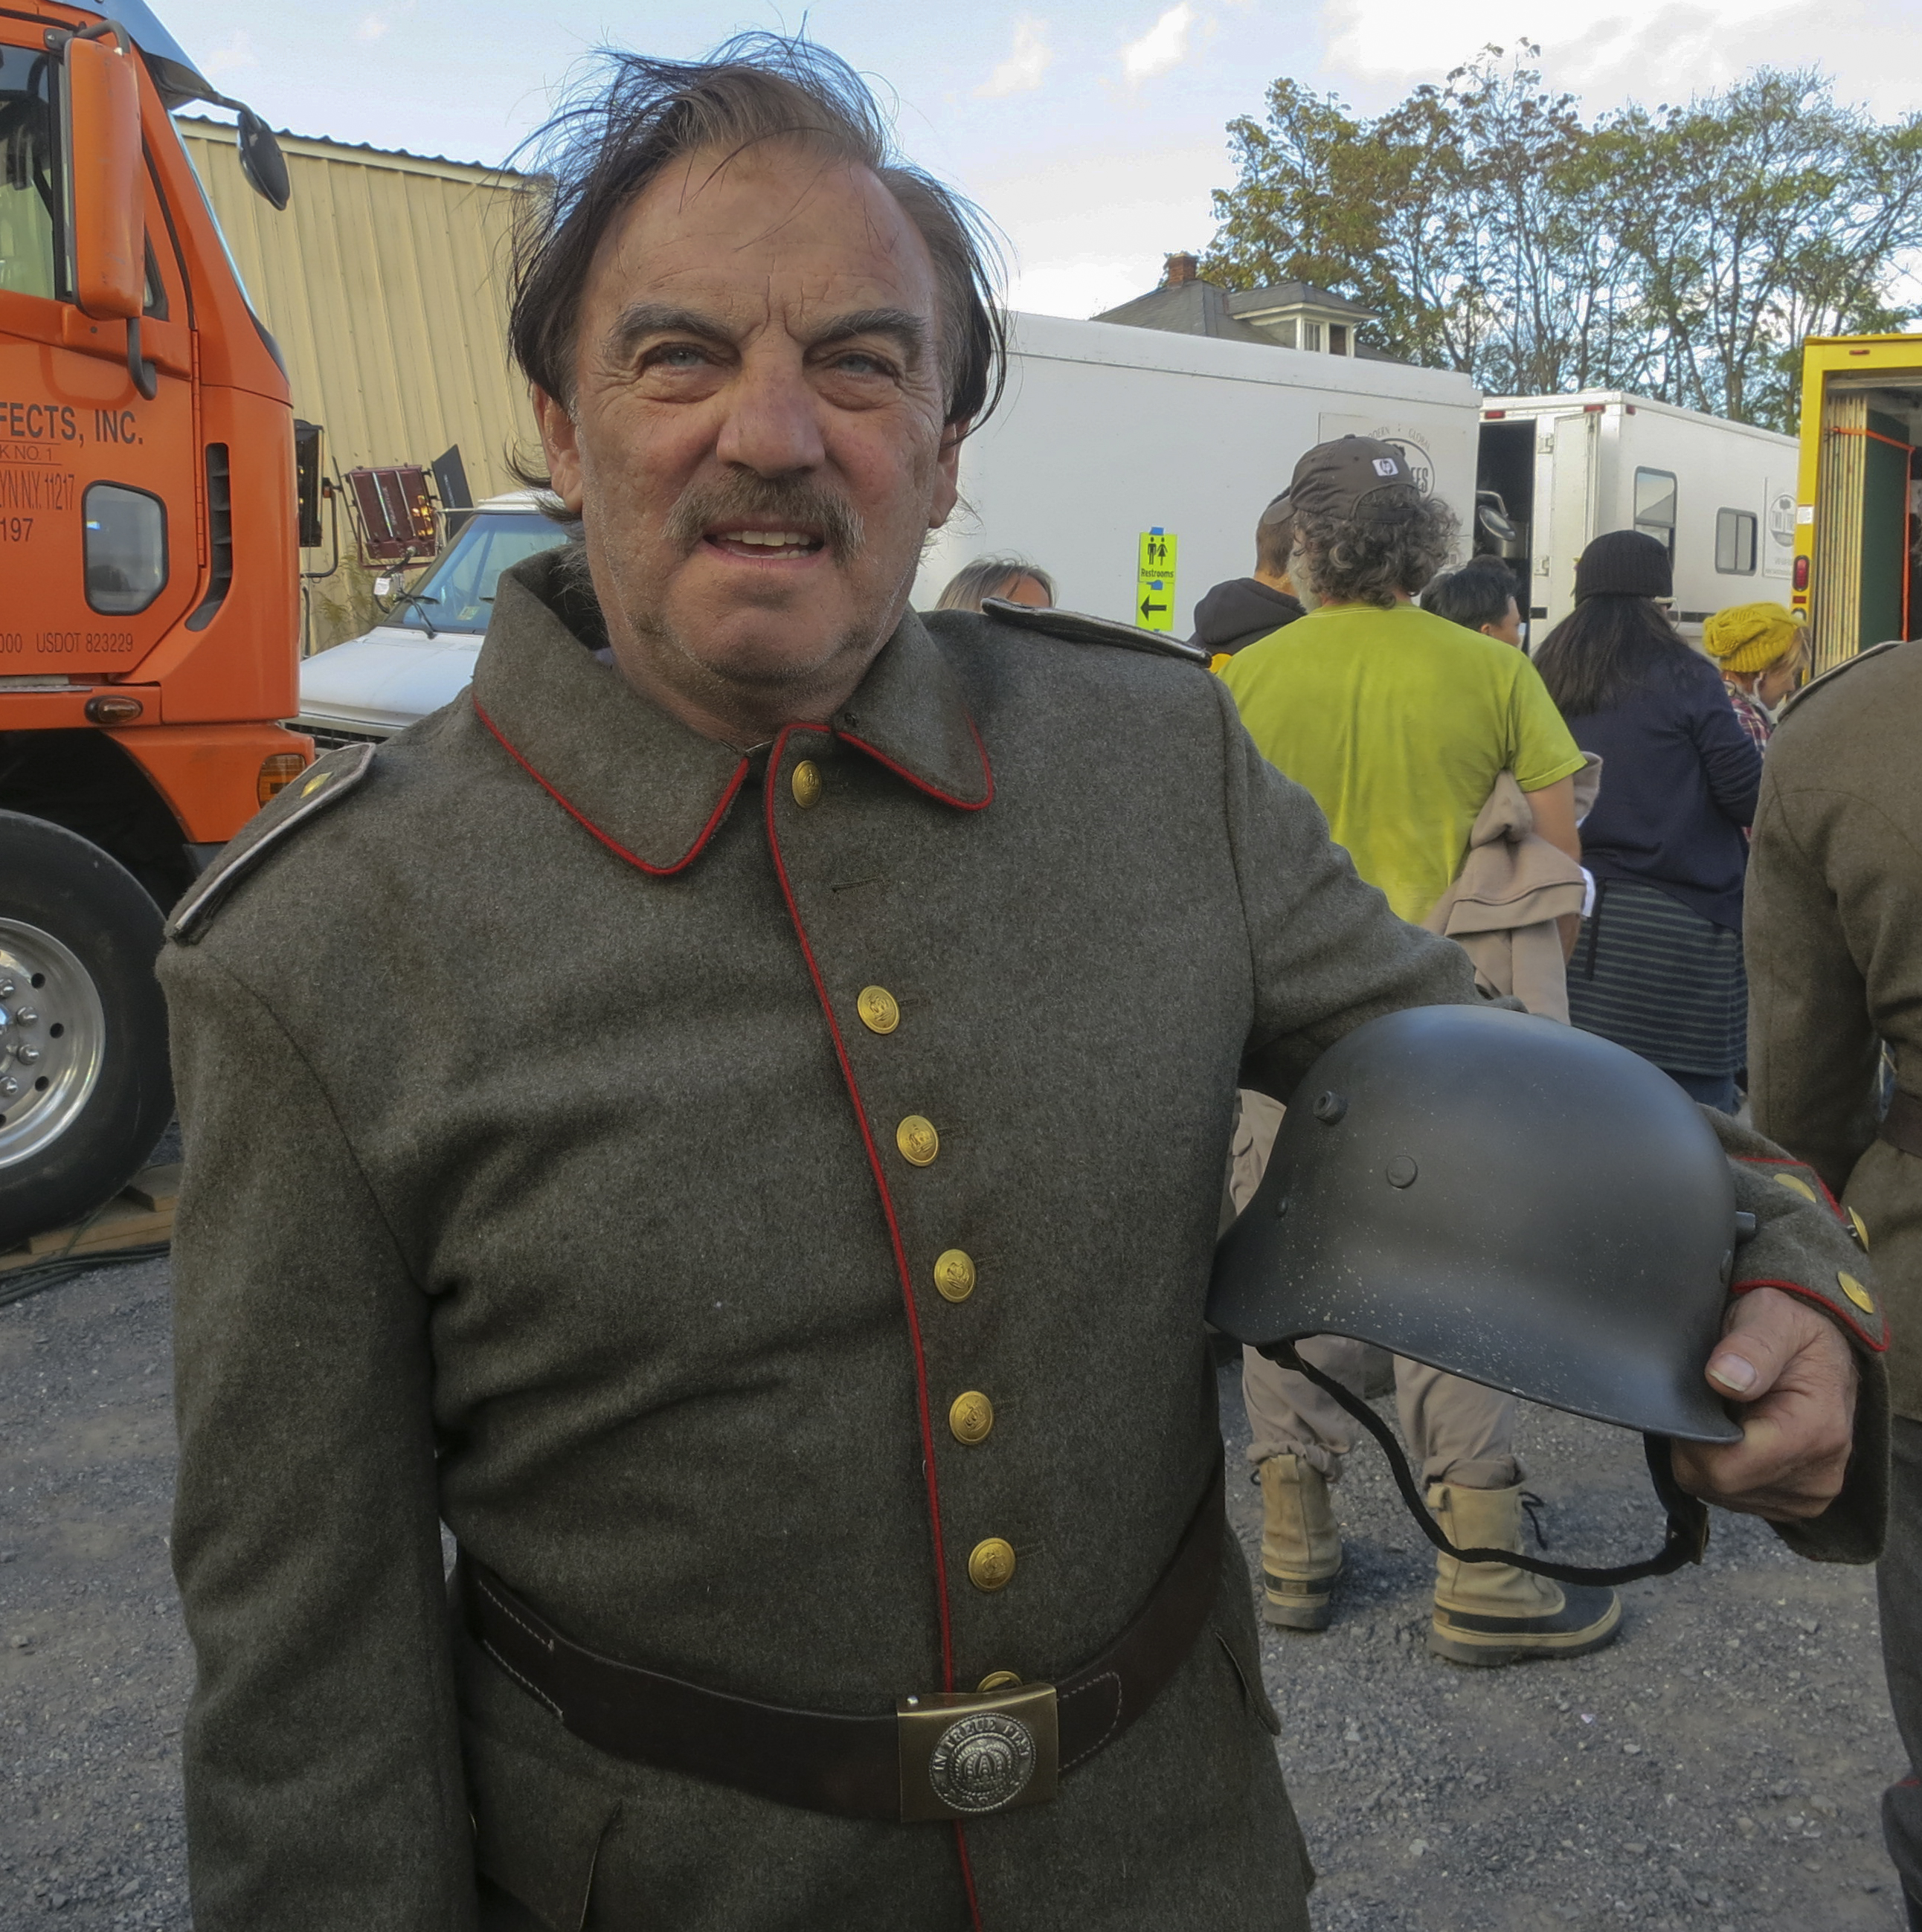 On the set for The World Wars.